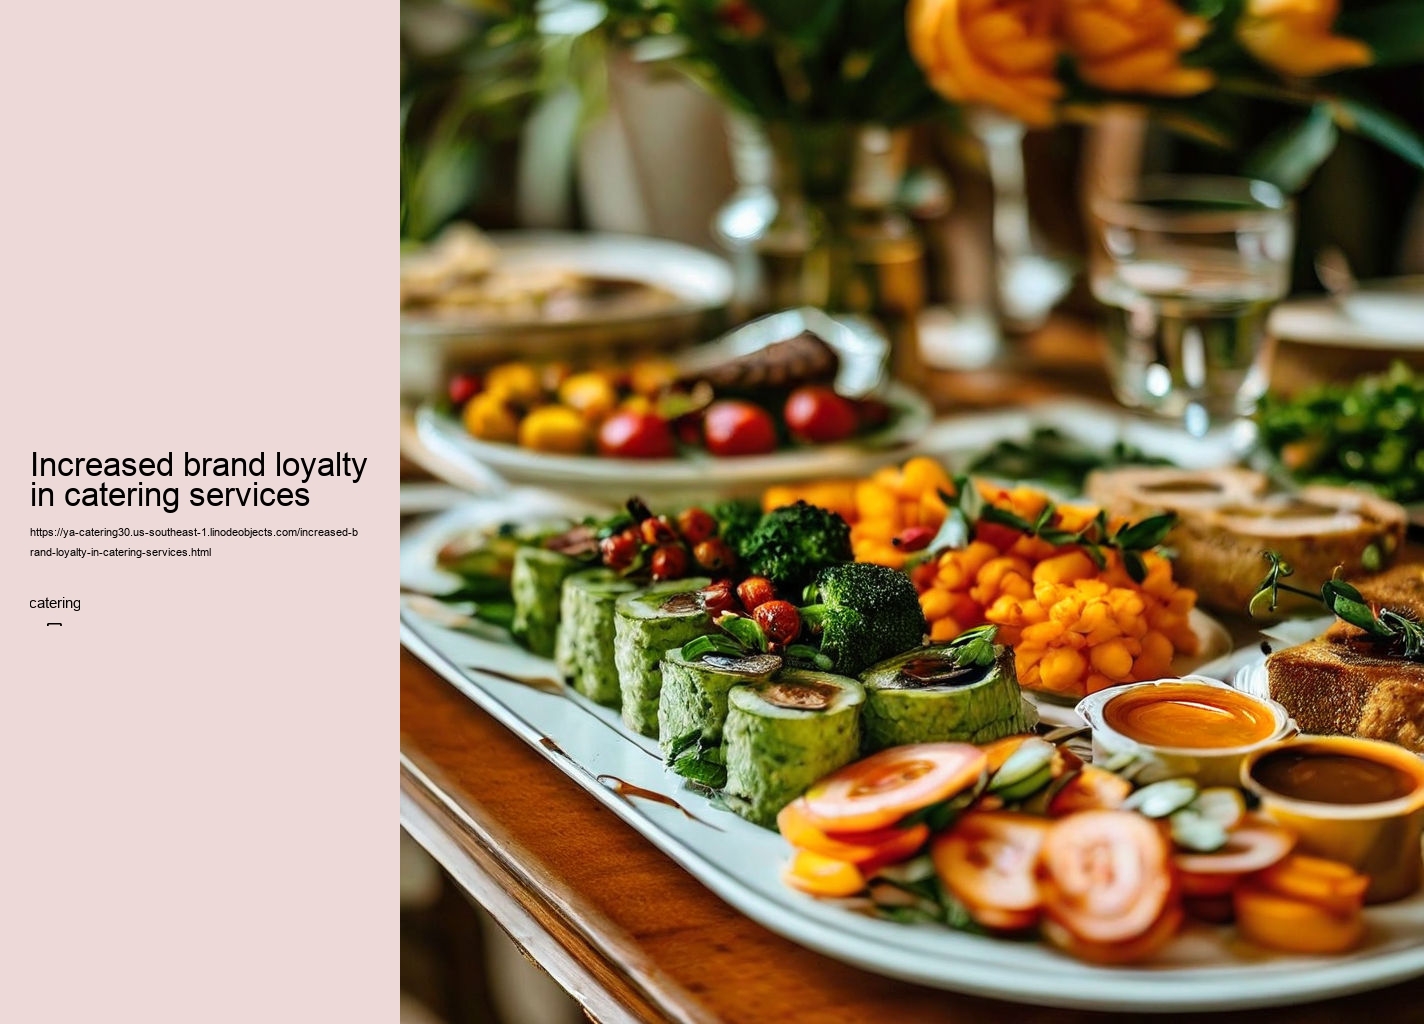 Increased brand loyalty in catering services